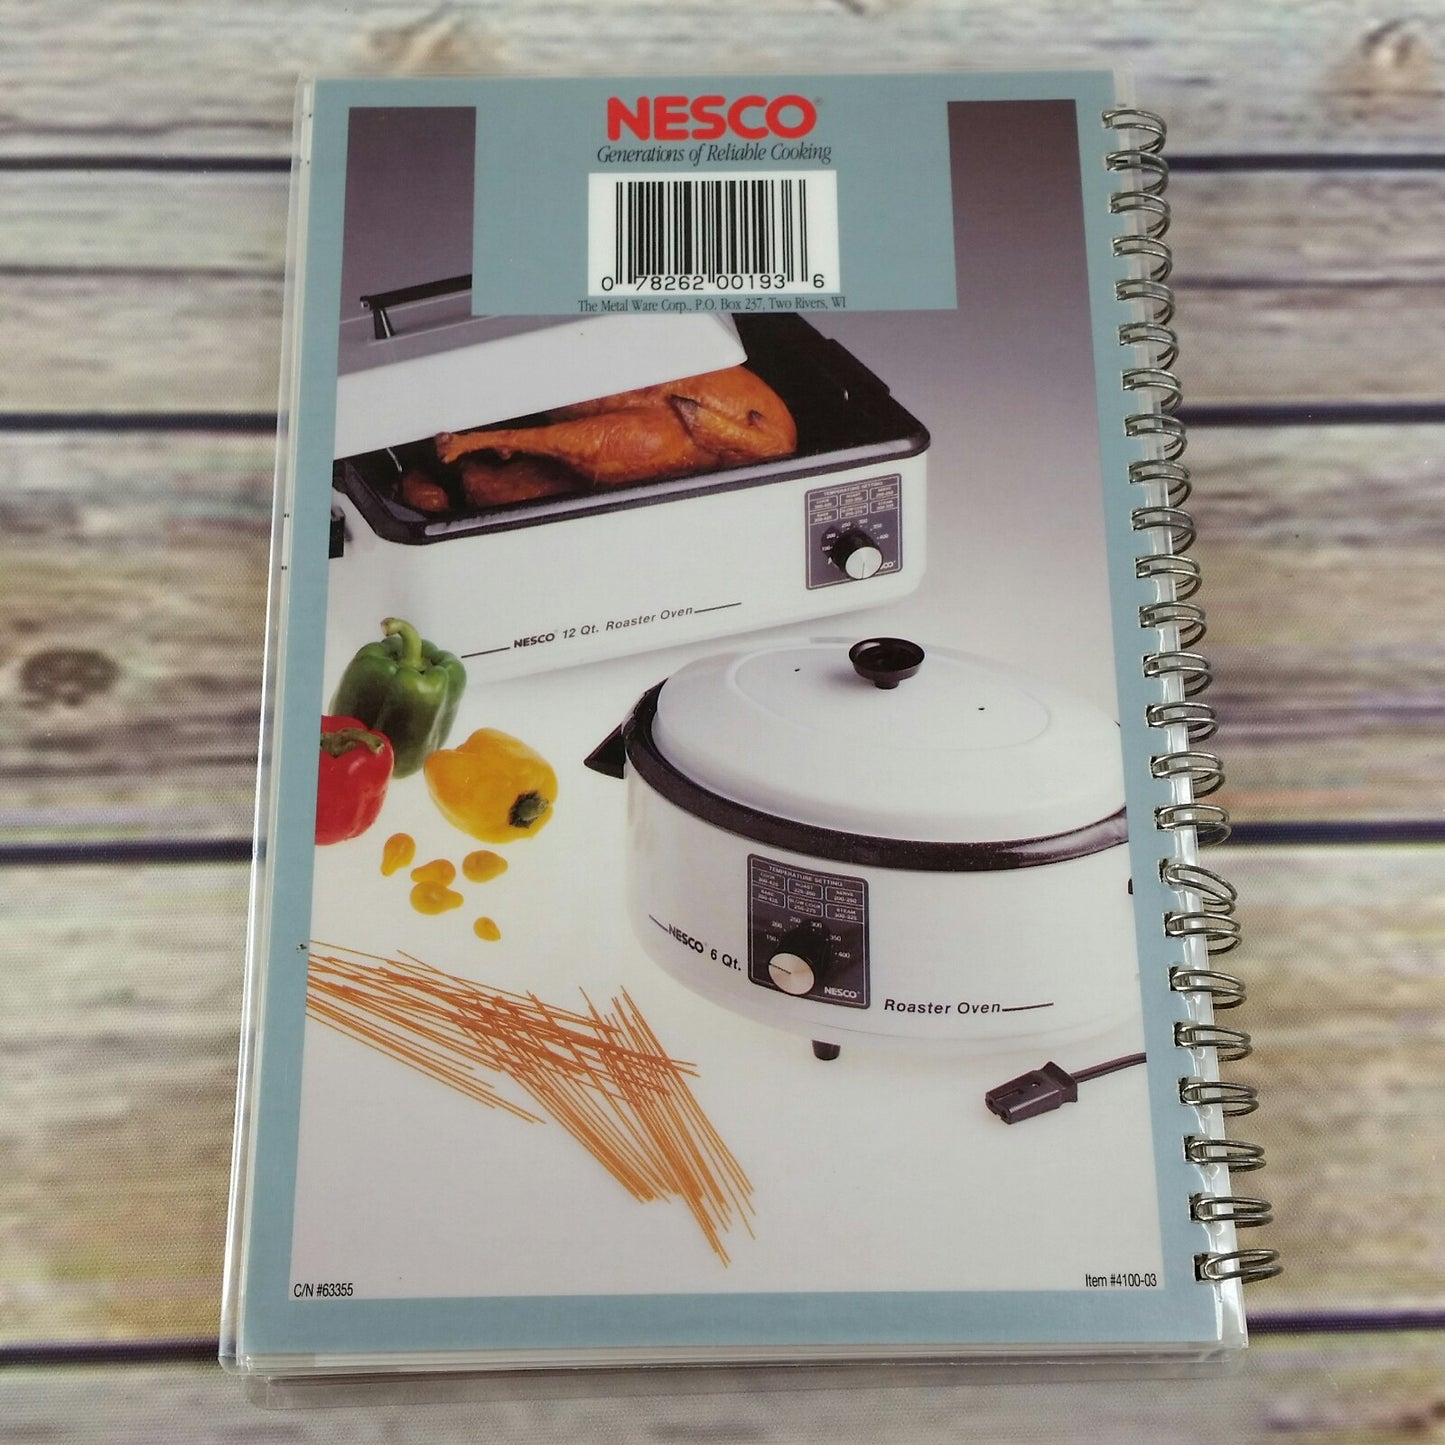 Vintage Cookbook Nesco Roaster Ovens Cooking Recipes Promo 1992 Spiral Bound Home Cooking Naturally 6 Qt and 12 Qt - At Grandma's Table